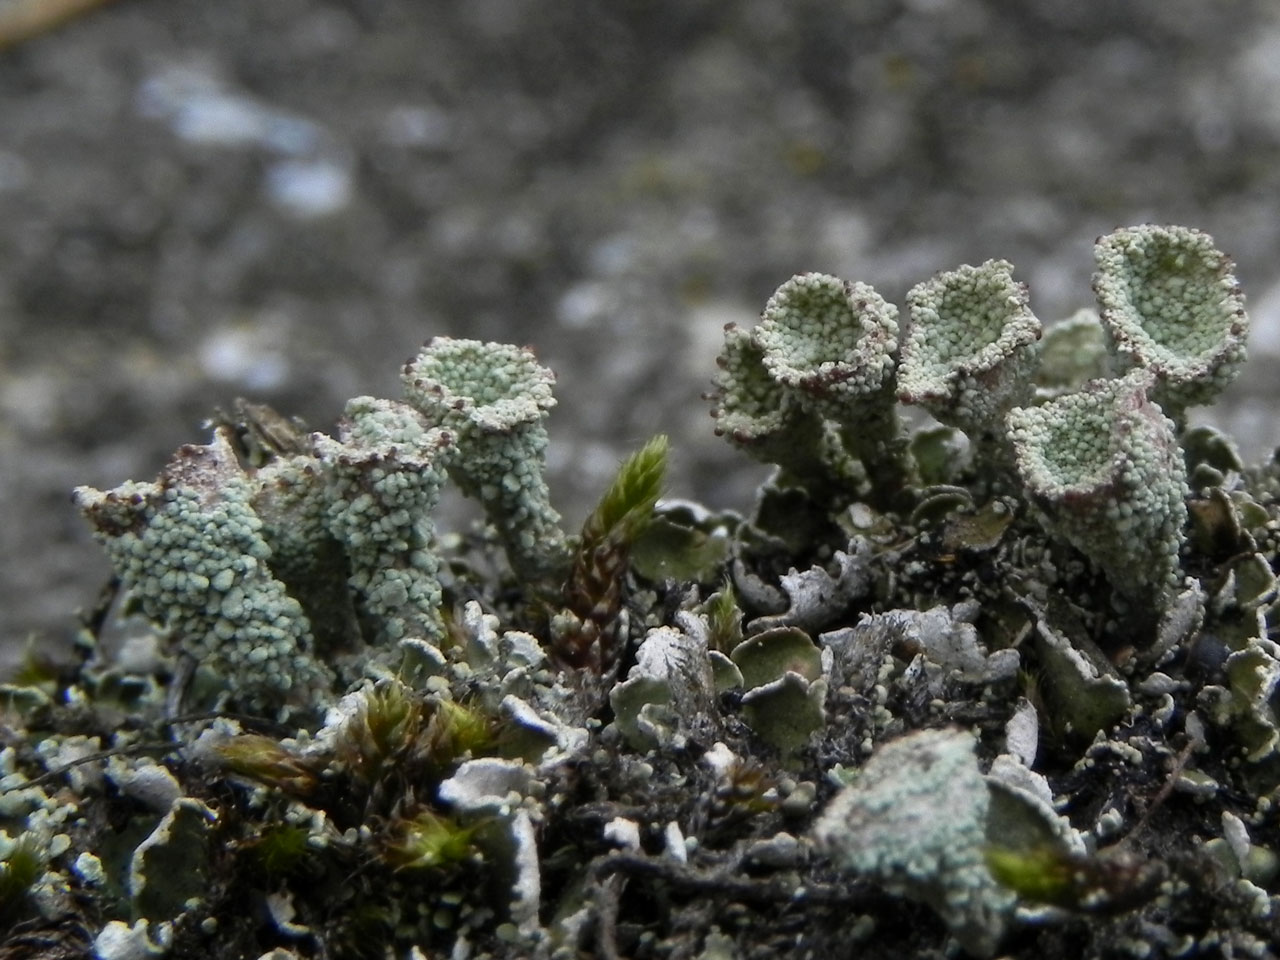 Cladonia humilis schizidiate morph, extreme form, Yew Tree Heath, New Forest